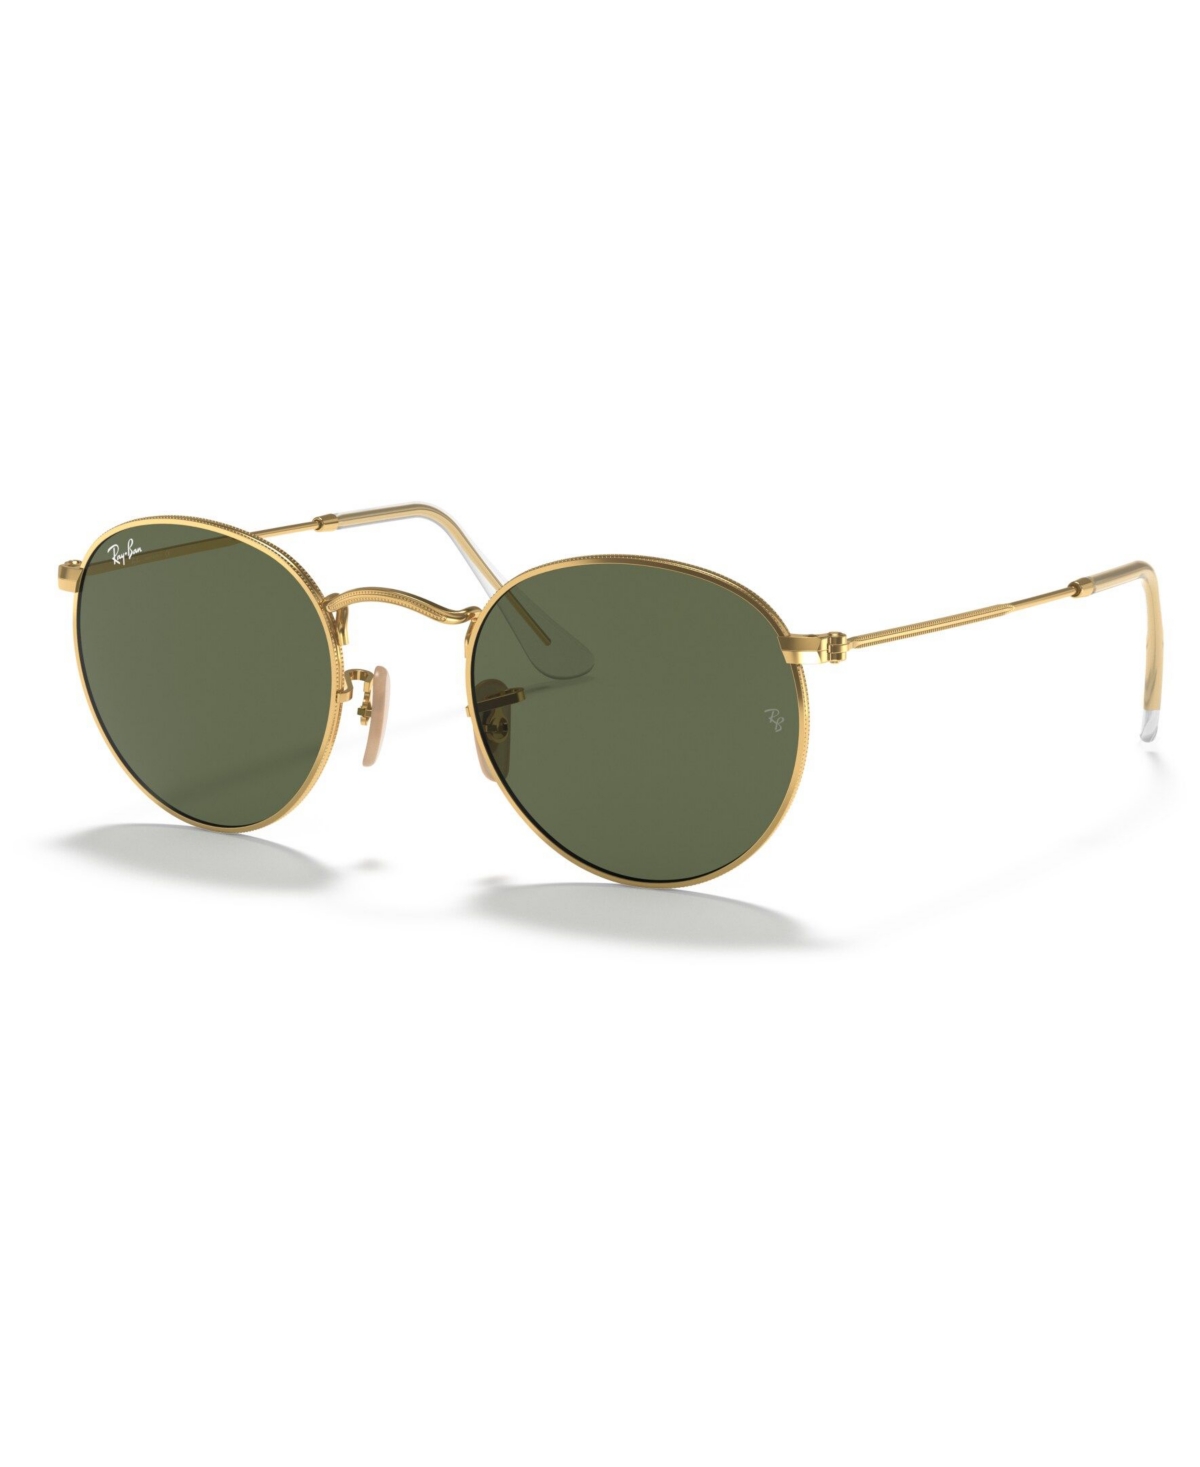 Ray Ban Round Metal Green Classic Unisex Sunglasses Rb3447 001 53